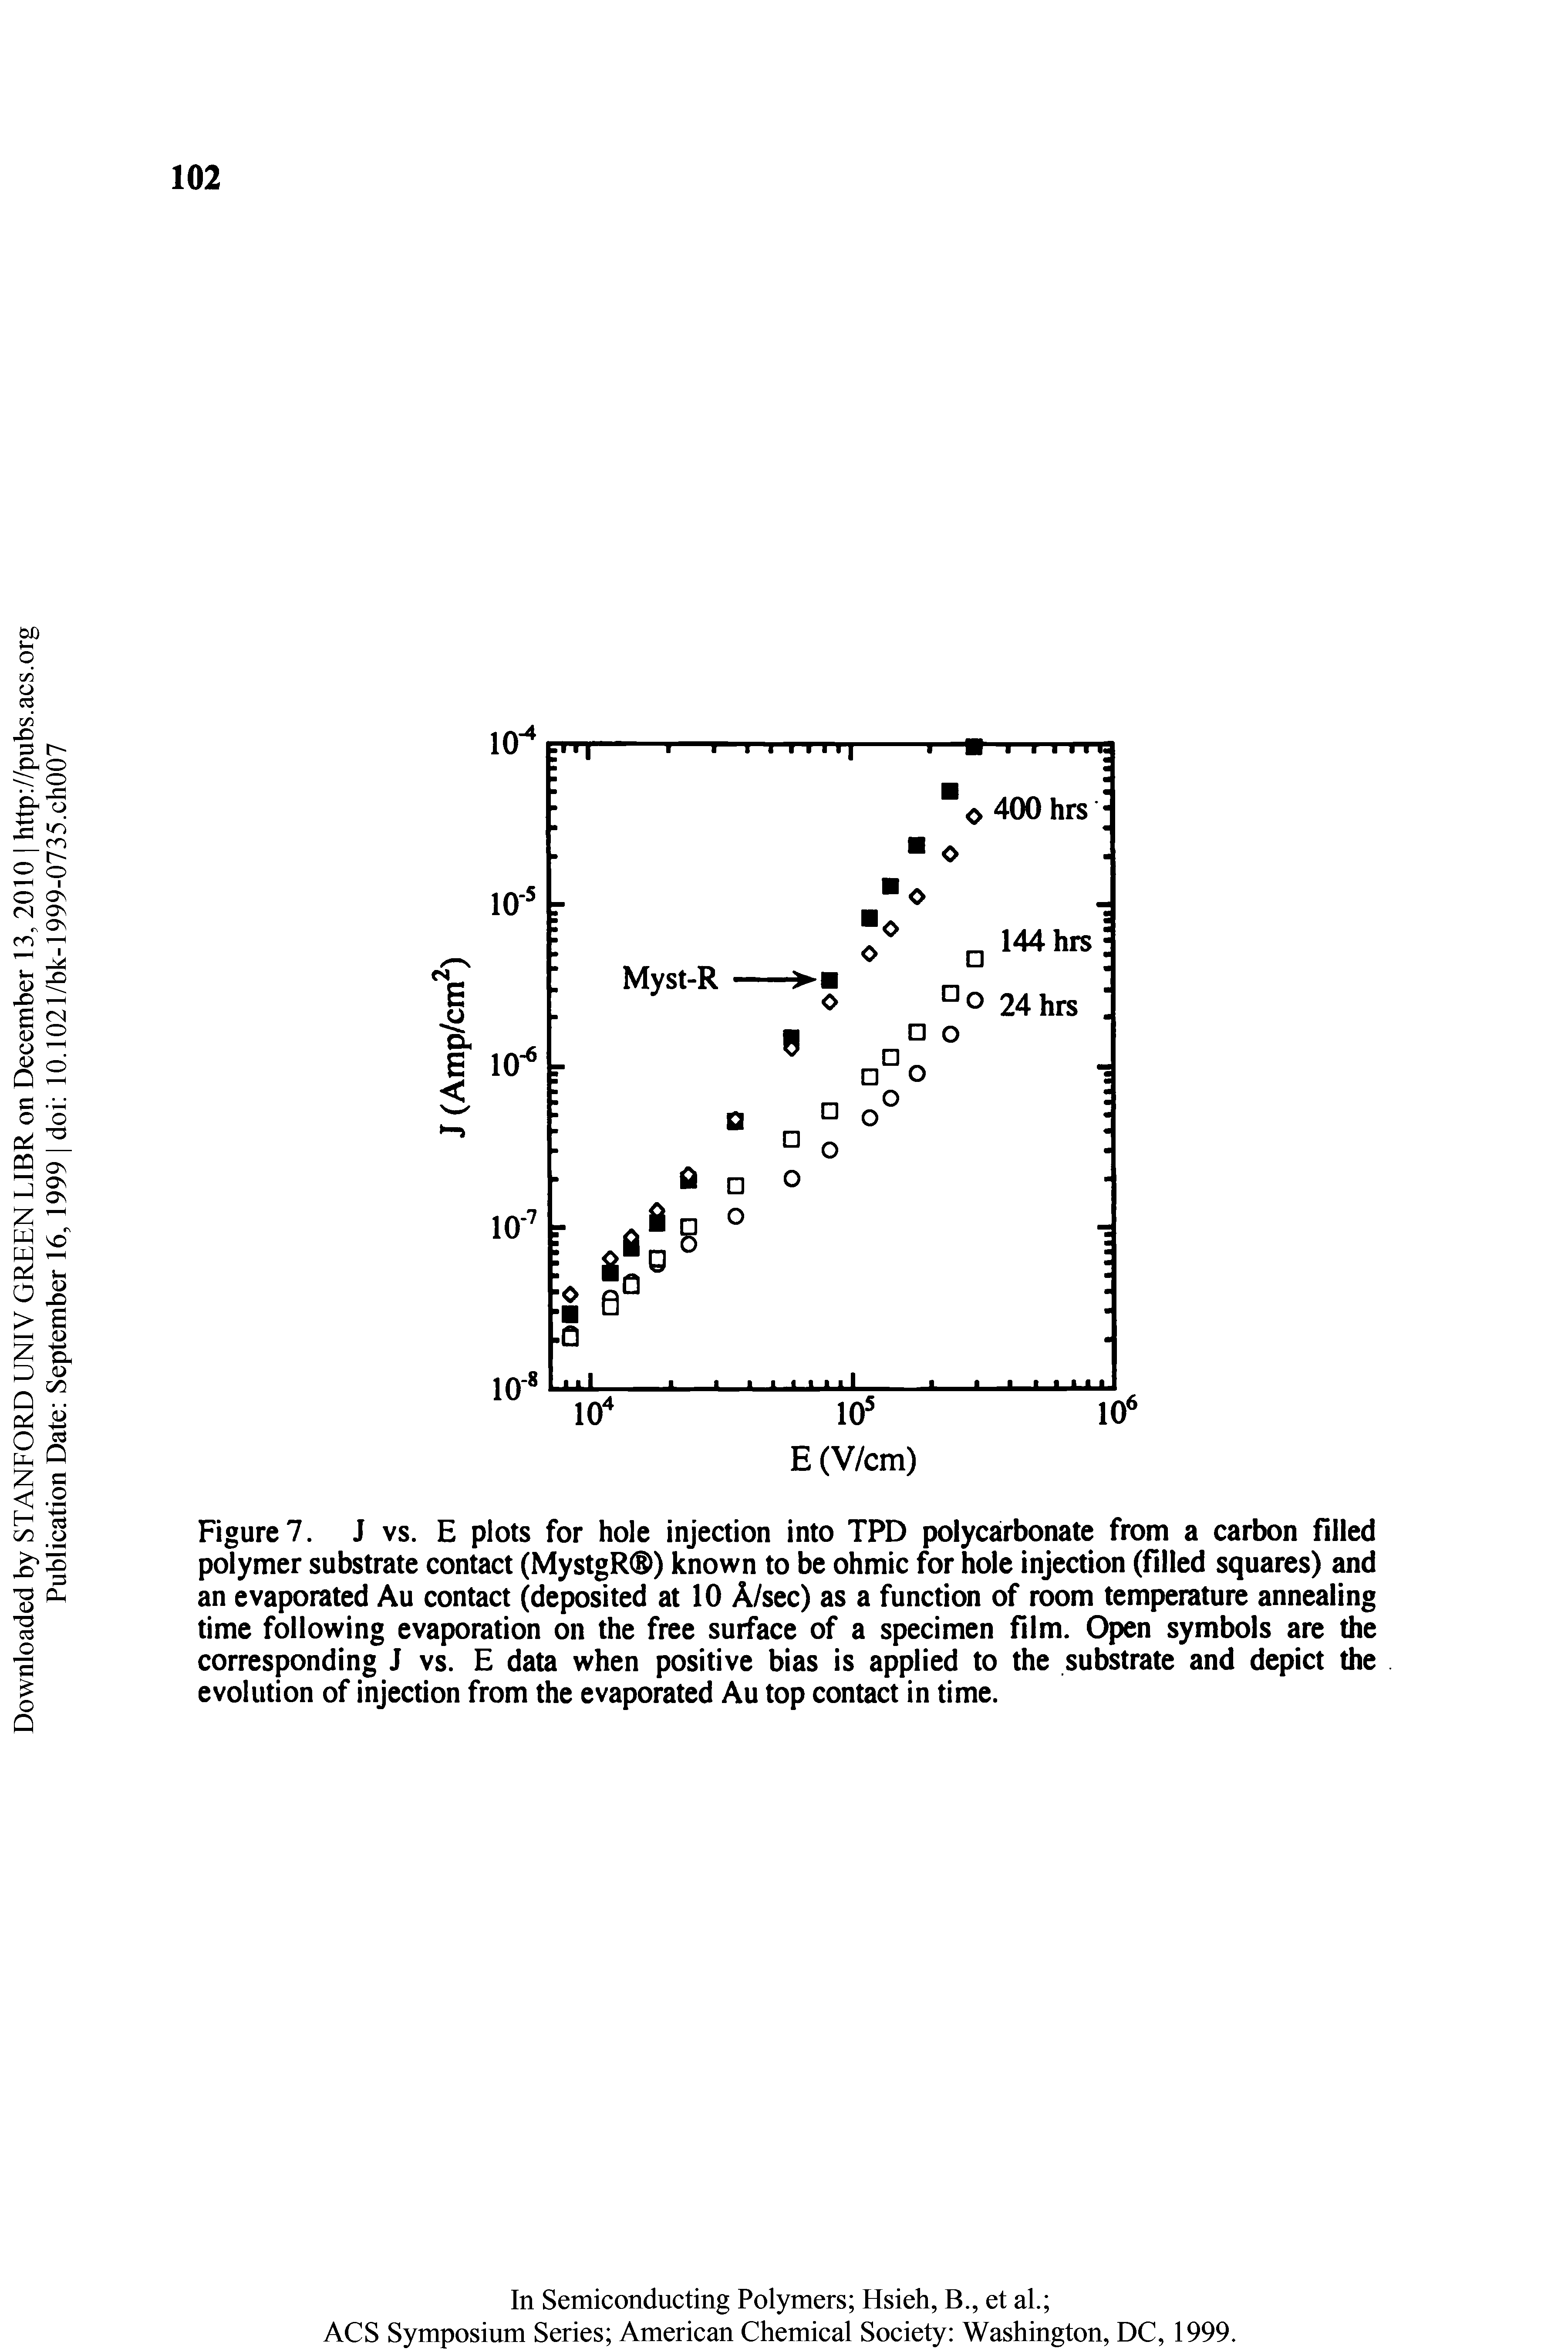 Figure . J vs. E plots for hole injection into TPD polycarbonate from a carbon filled polymer substrate contact (MystgR ) known to be ohmic for hole injection (filled squares) and an evaporated Au contact (deposited at 10 A/sec) as a function of room temperature annealing time following evaporation on the free surface of a specimen film. Open symbols are the corresponding J vs. E data when positive bias is applied to the substrate and depict the evolution of injection from the evaporated Au top contact in time.